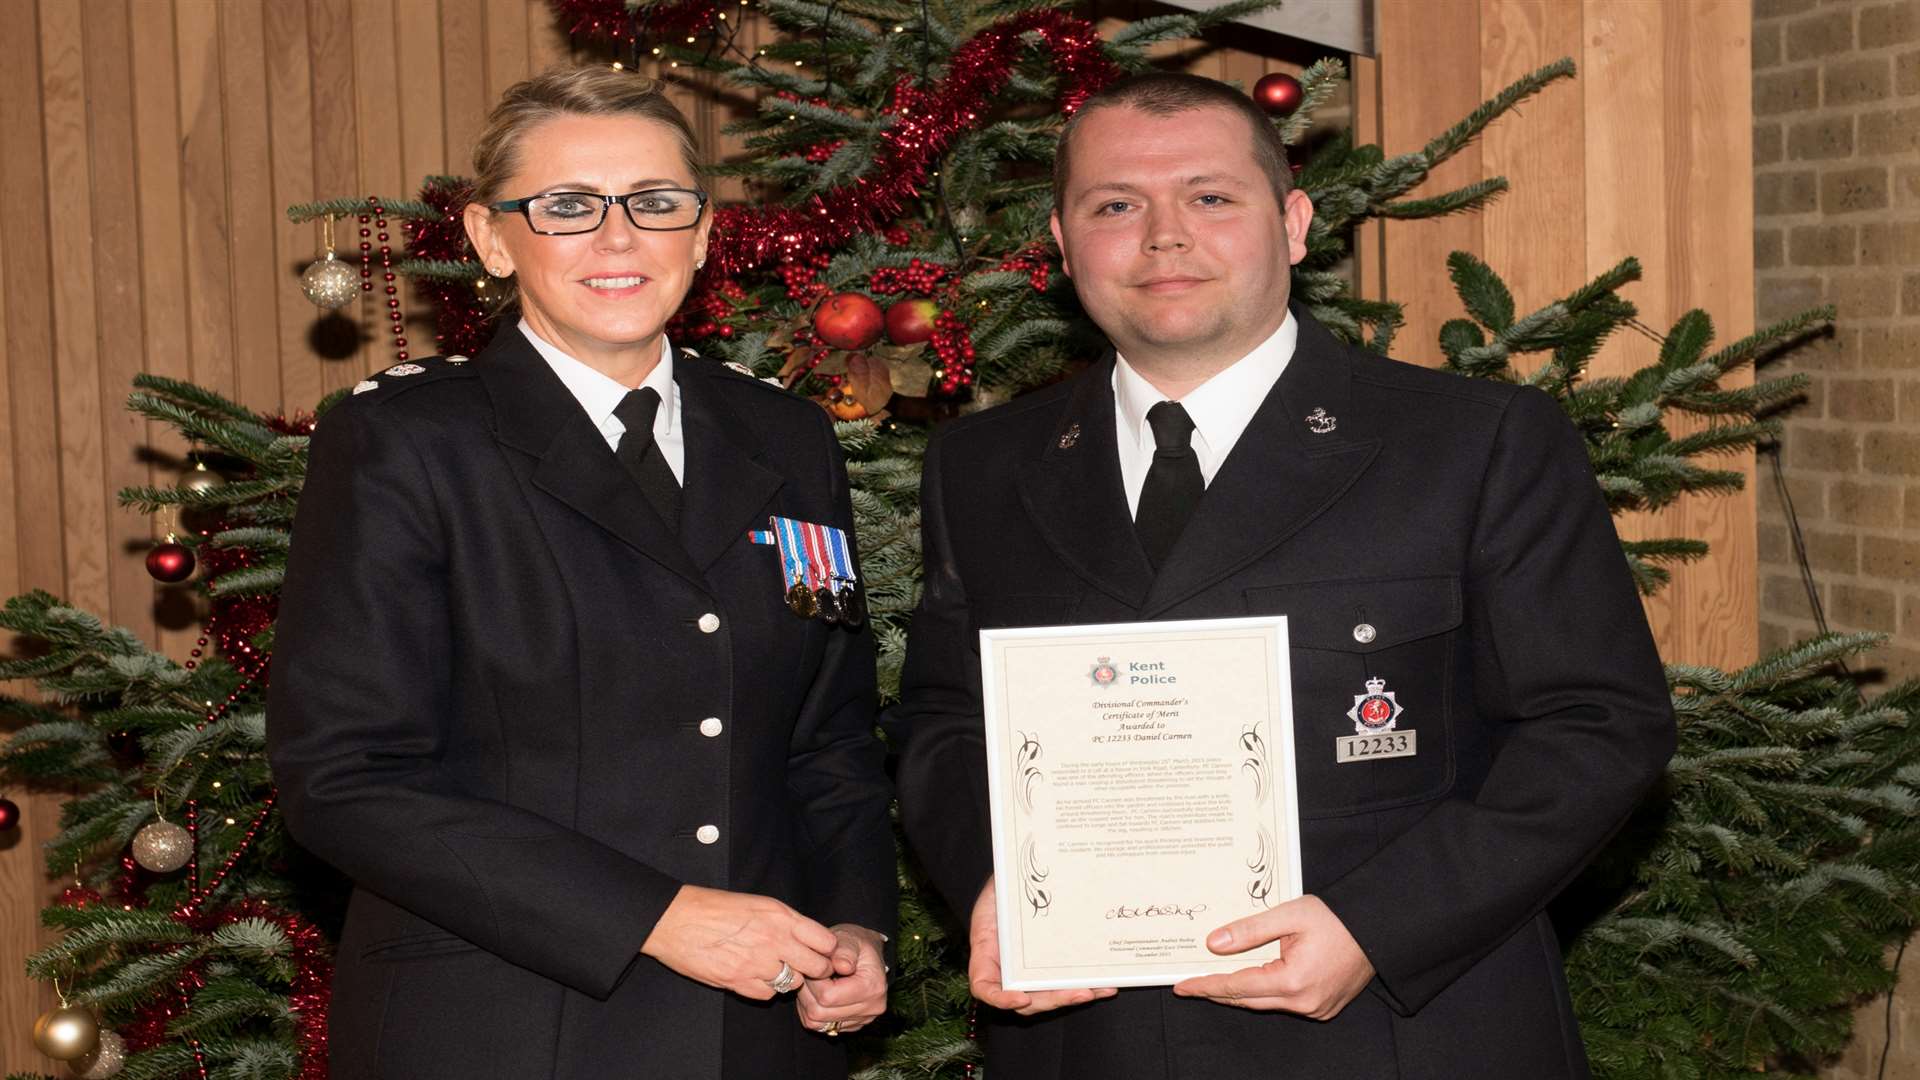 PC Daniel Carmen was one of a number of officers who were awarded for their tireless work across the district, after he was attacked by a man with a knife and needed eight stitches in his leg. Pictured with chief superintendent Andrea Bishop.